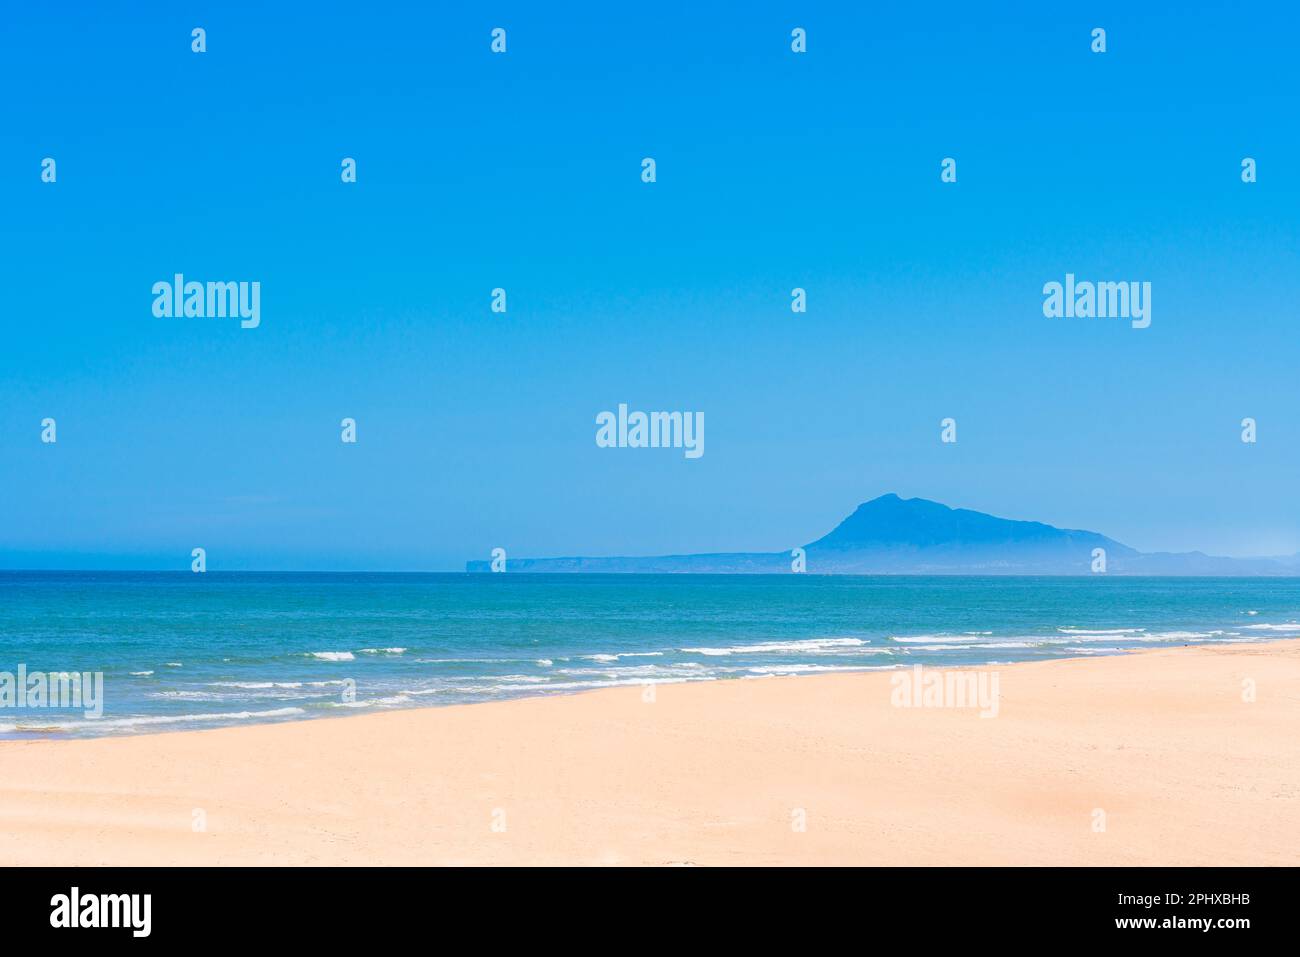 A beach with a blue sky and a mountain in the background Stock Photo